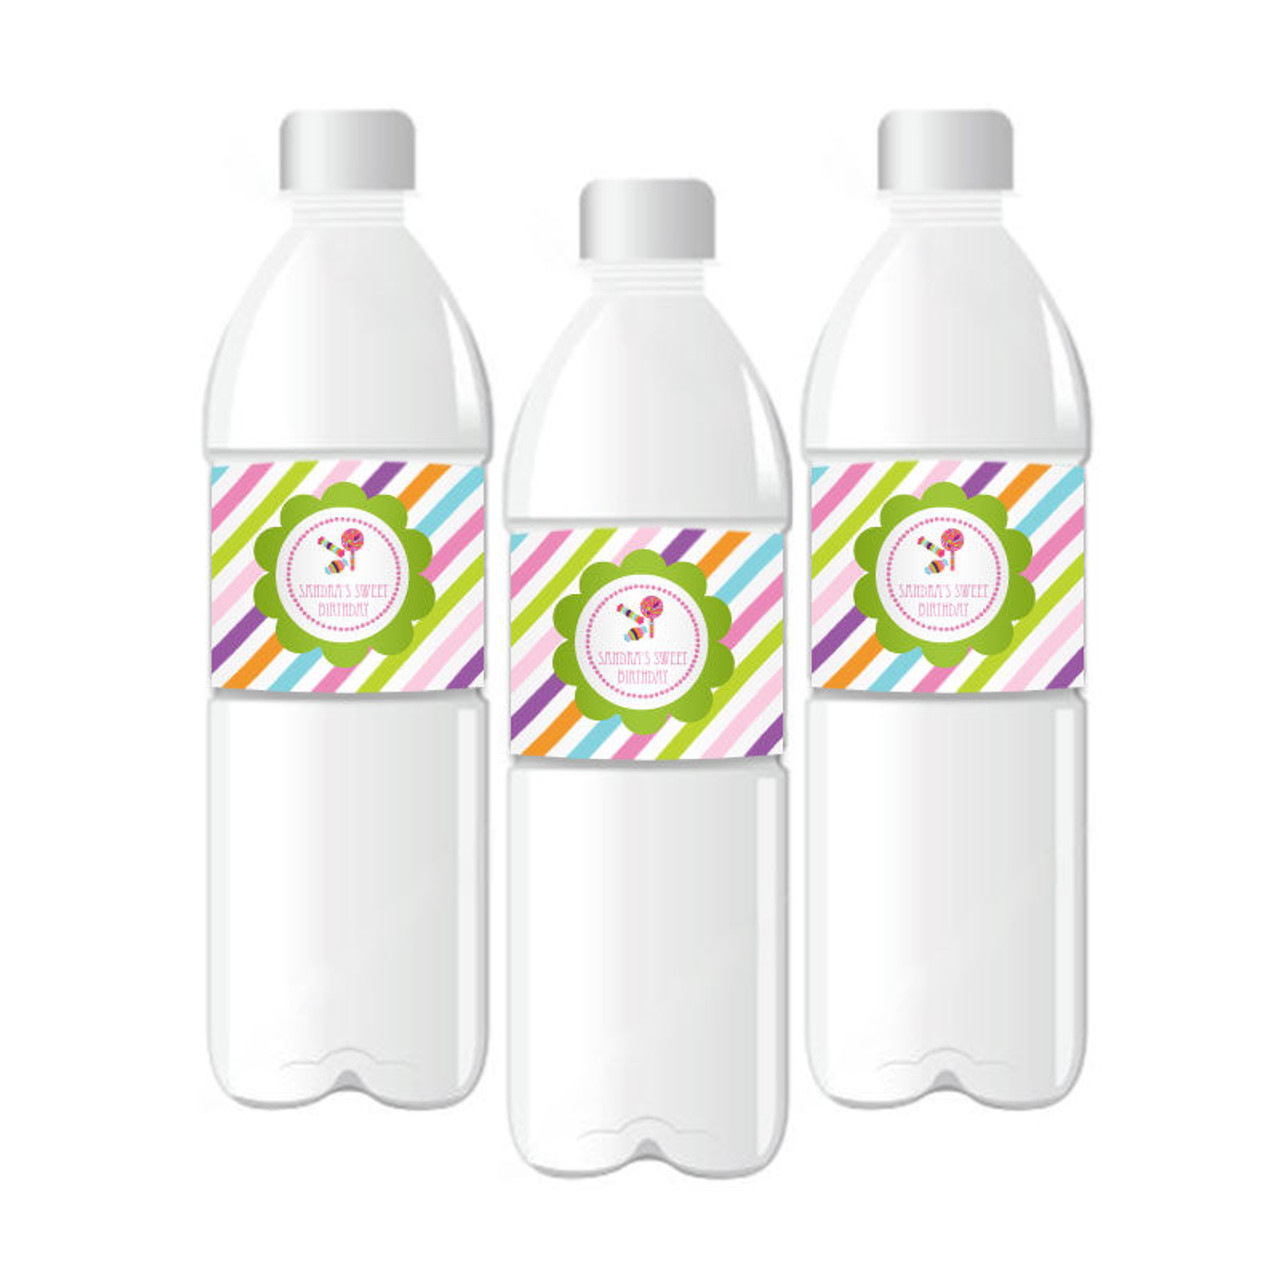 https://cdn11.bigcommerce.com/s-8bfcbt/images/stencil/1280x1280/products/2043/3895/Sweet_Shoppe_Party_Personalized_Water_Bottle_Labels__43258.1520905107.jpg?c=2